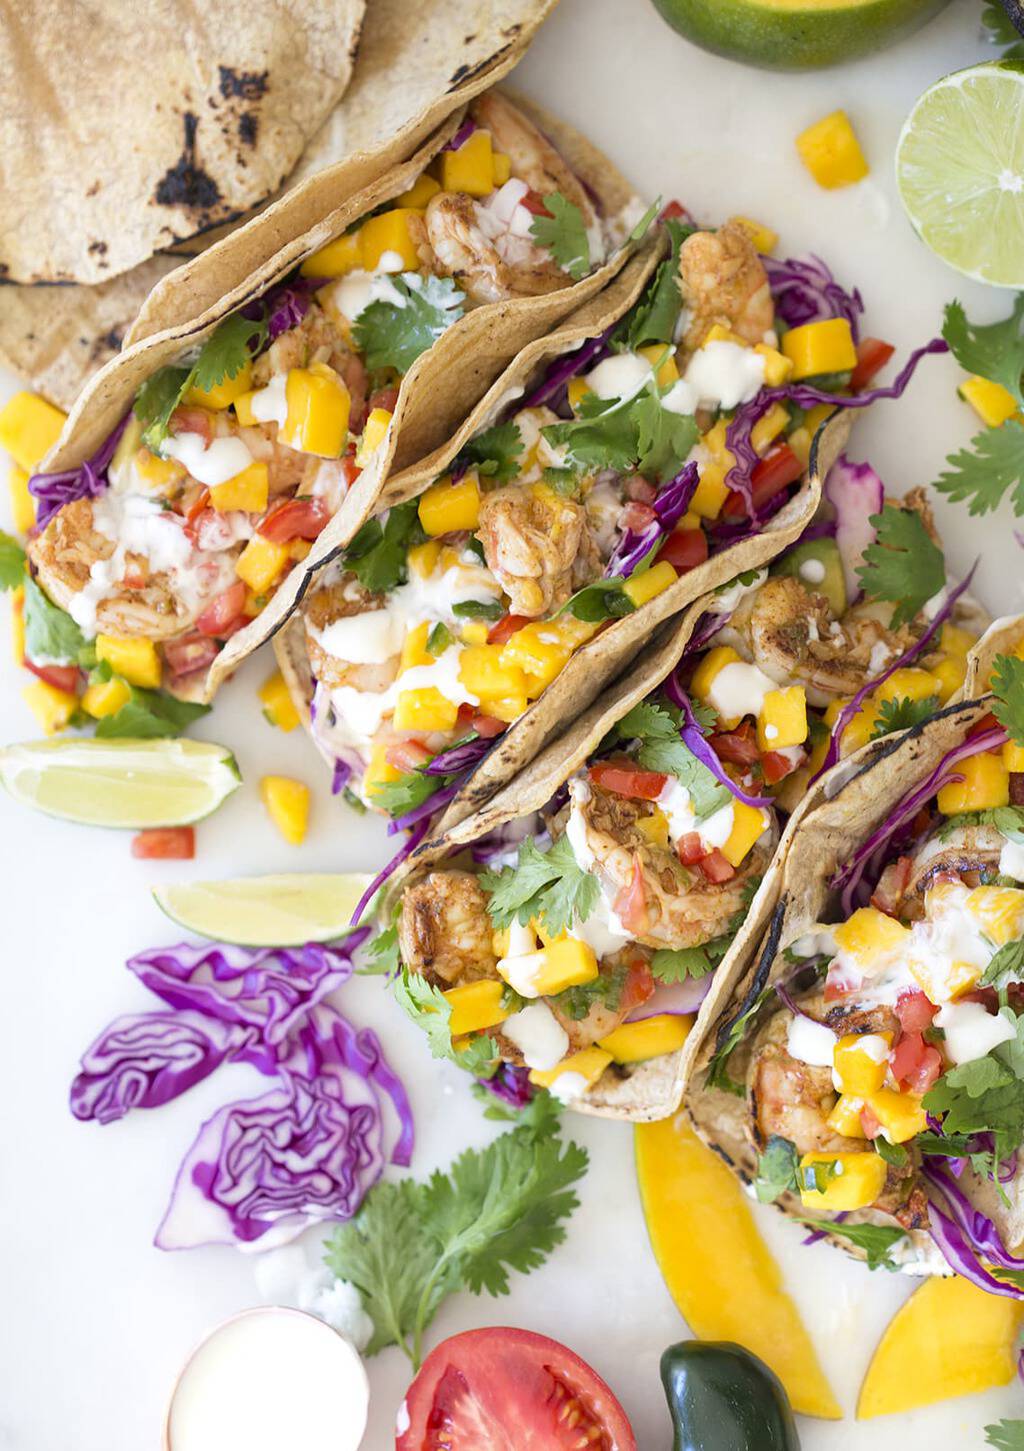 A photo of shrimp tacos topped with mango salsa, cabbage, cilantro and lime, taken from above.